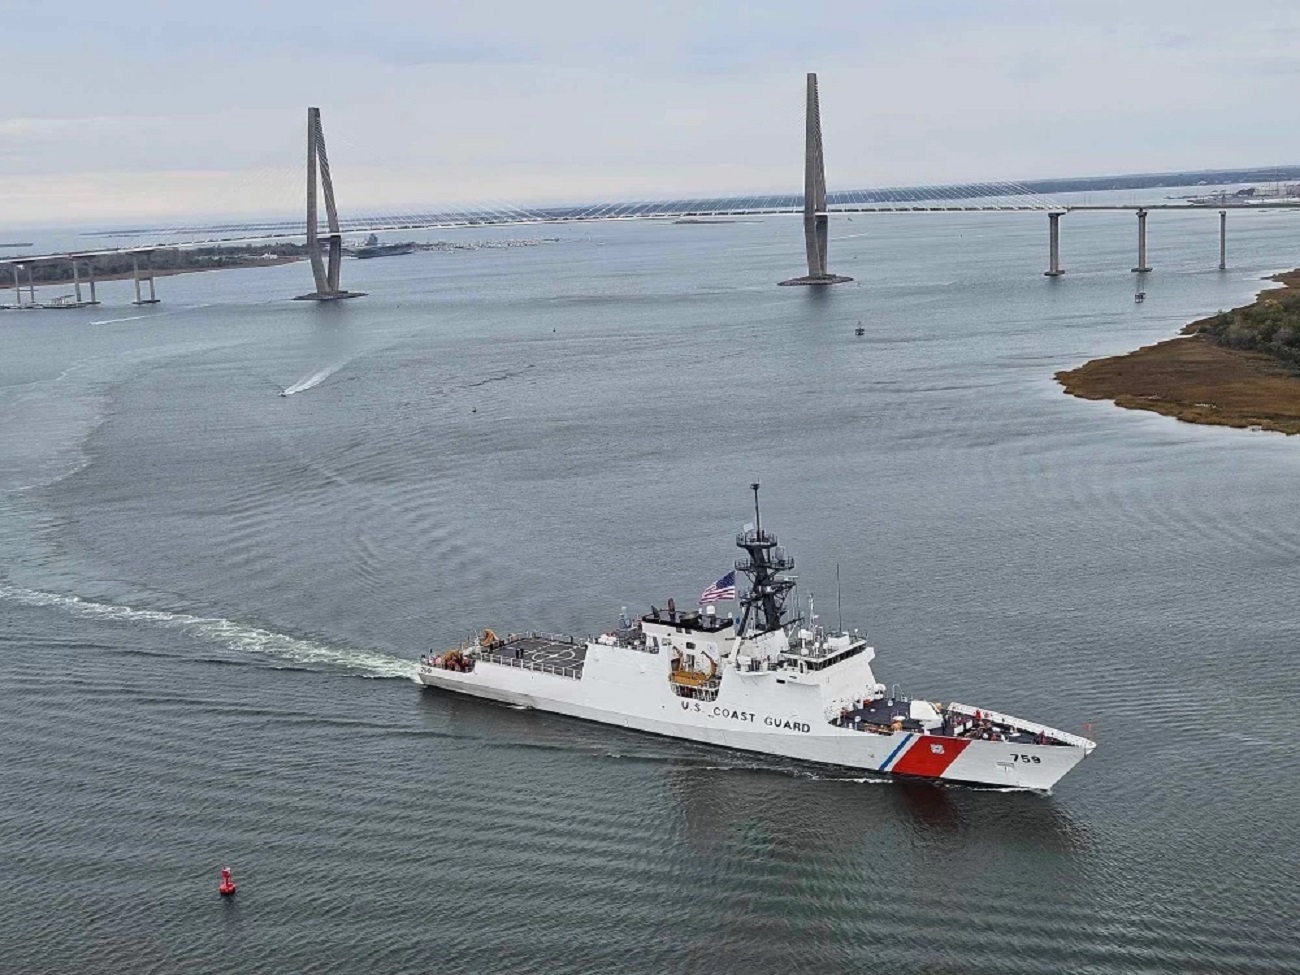 US Coast Guard Cutter Calhoun (WMSL 759) Arrives to New Momeport in Charleston